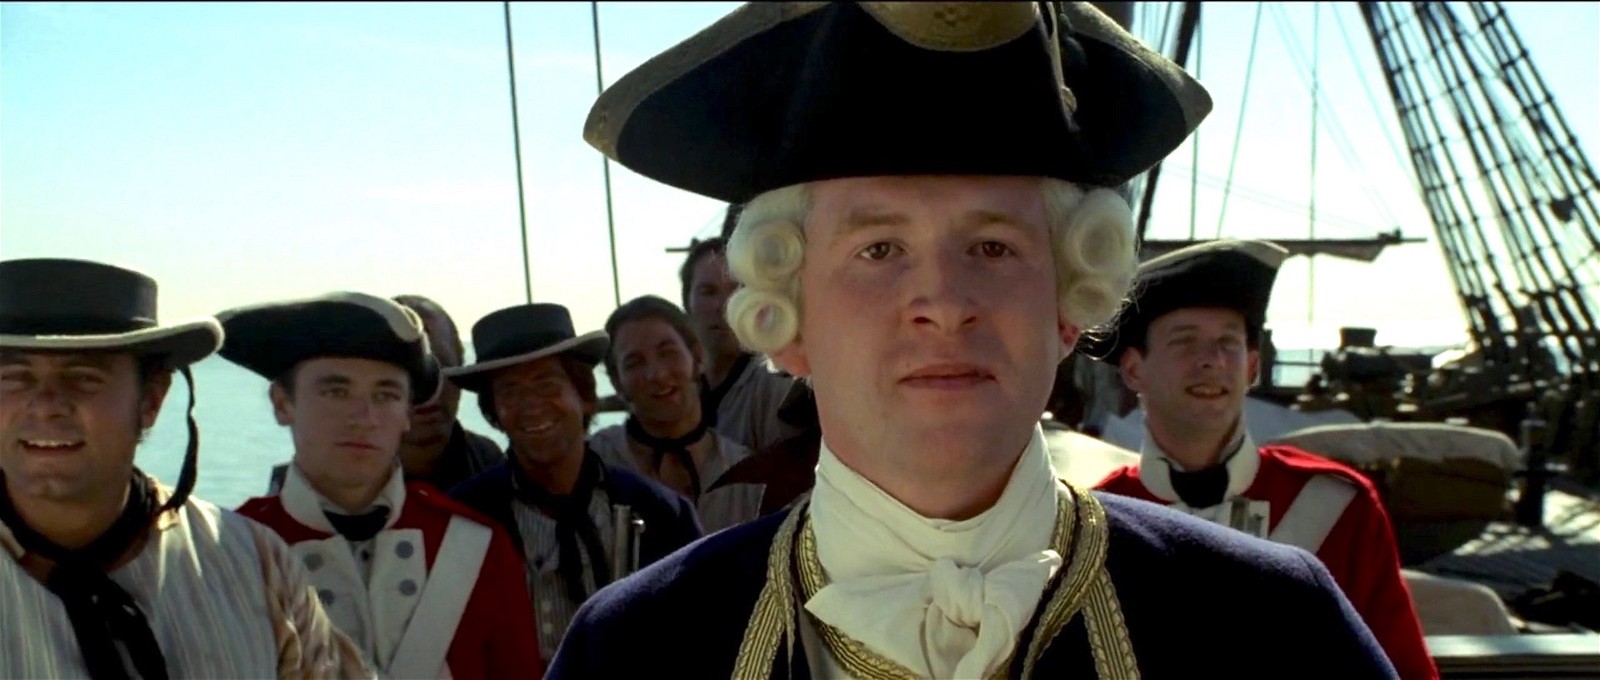 Damian O'Hare as Lt. Gillette in a still from Pirates of the Caribbean: The Curse of the Black Pearl (2003)